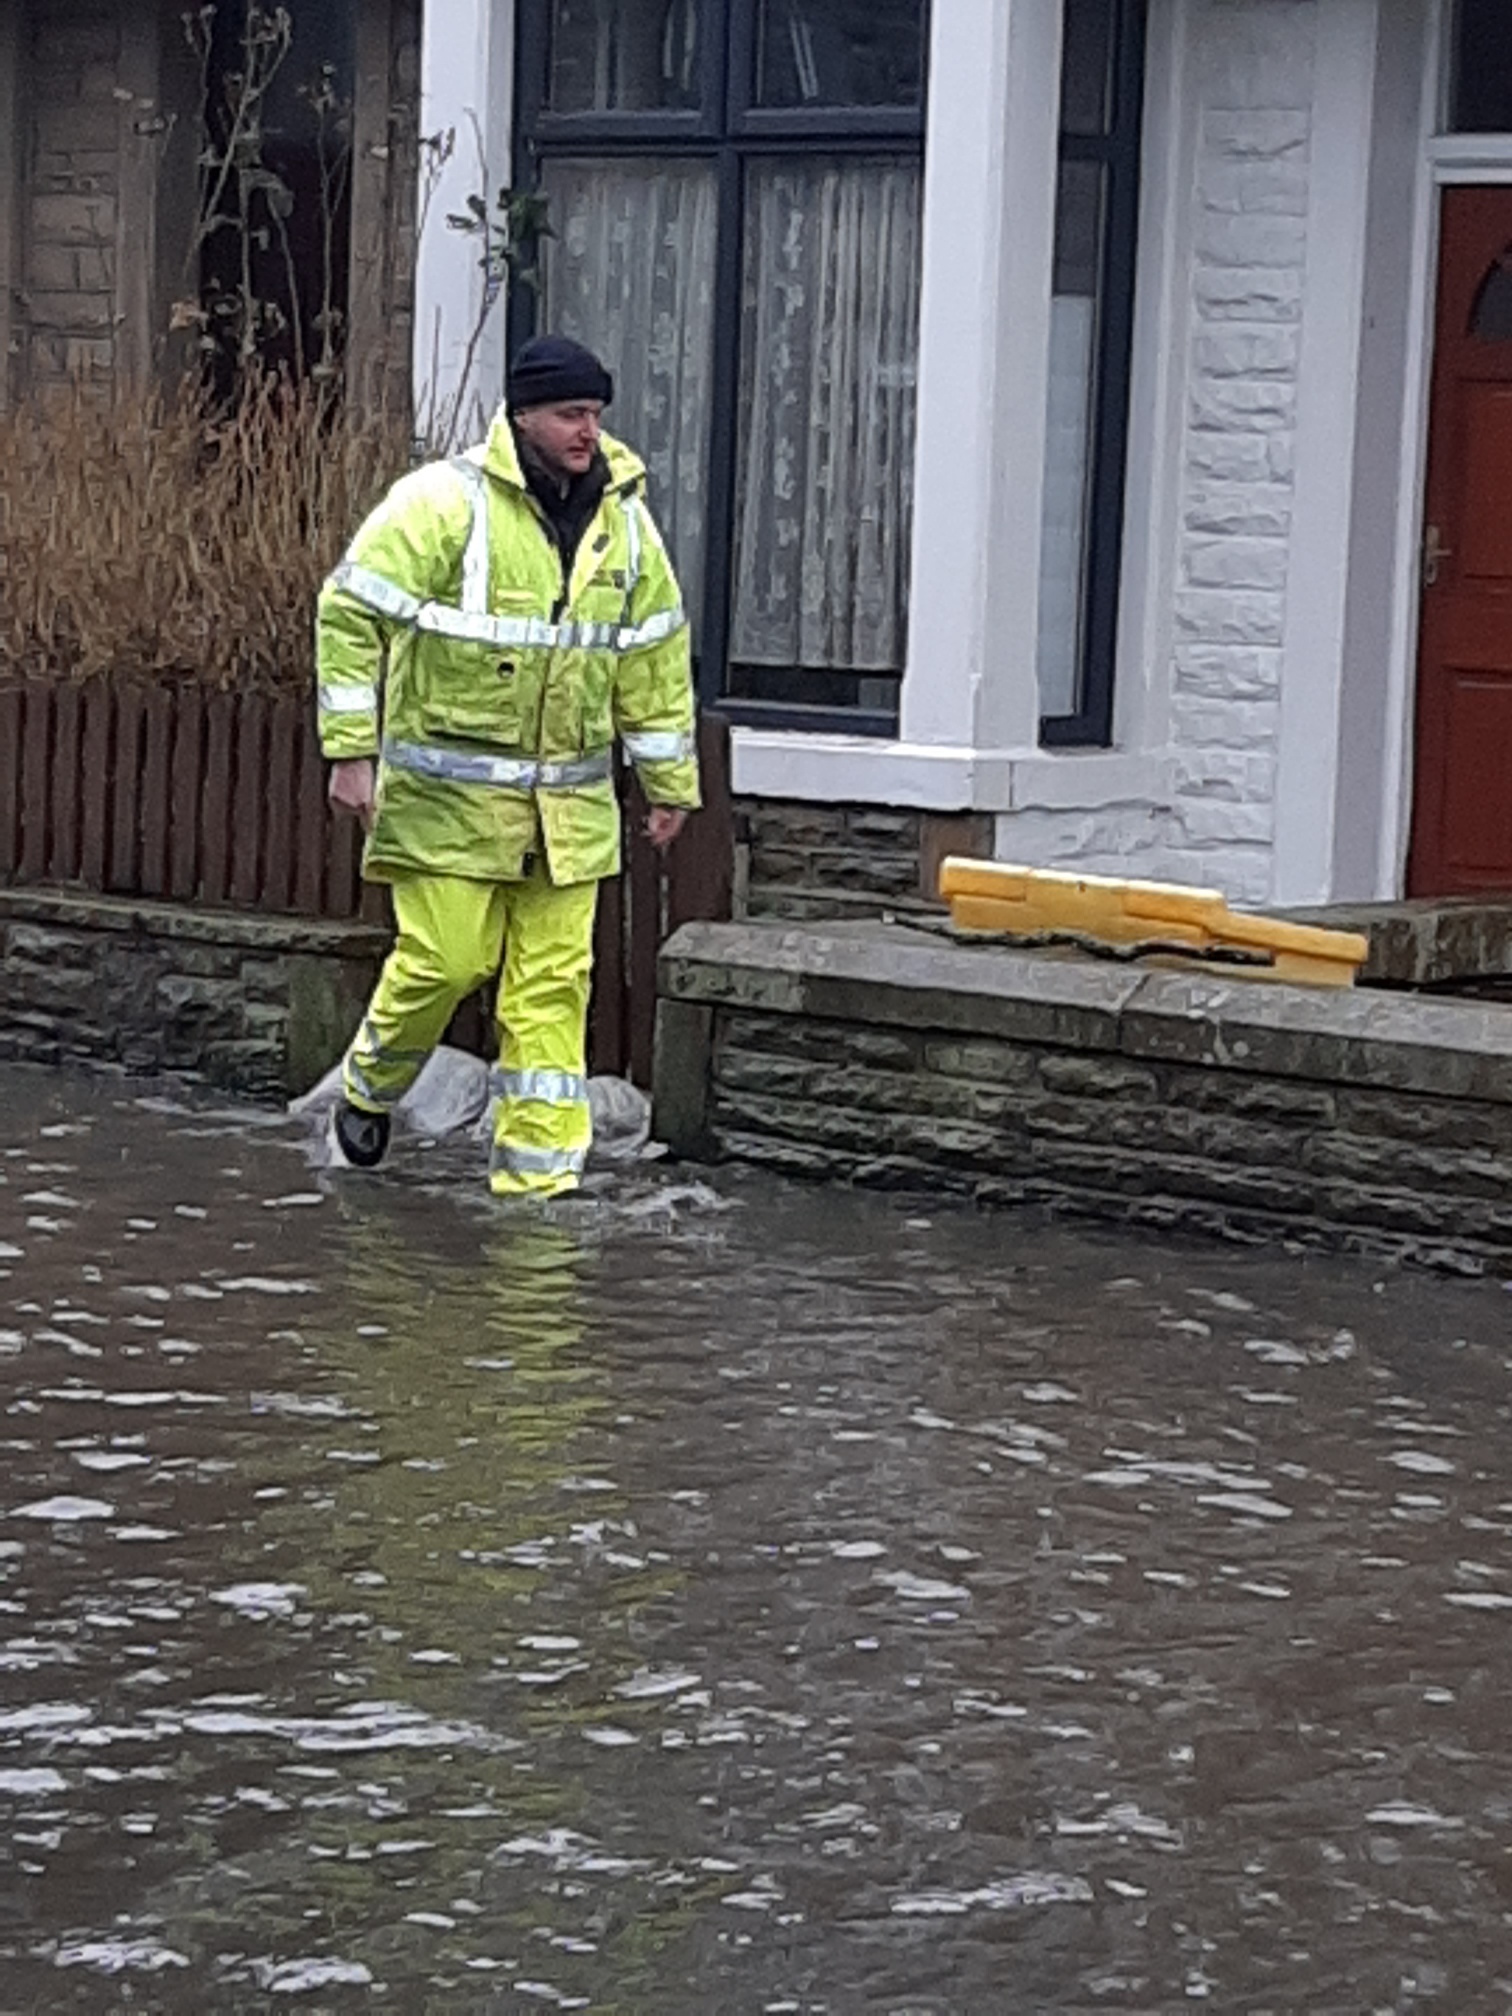 Be prepared in case of flooding in Pendle - news story